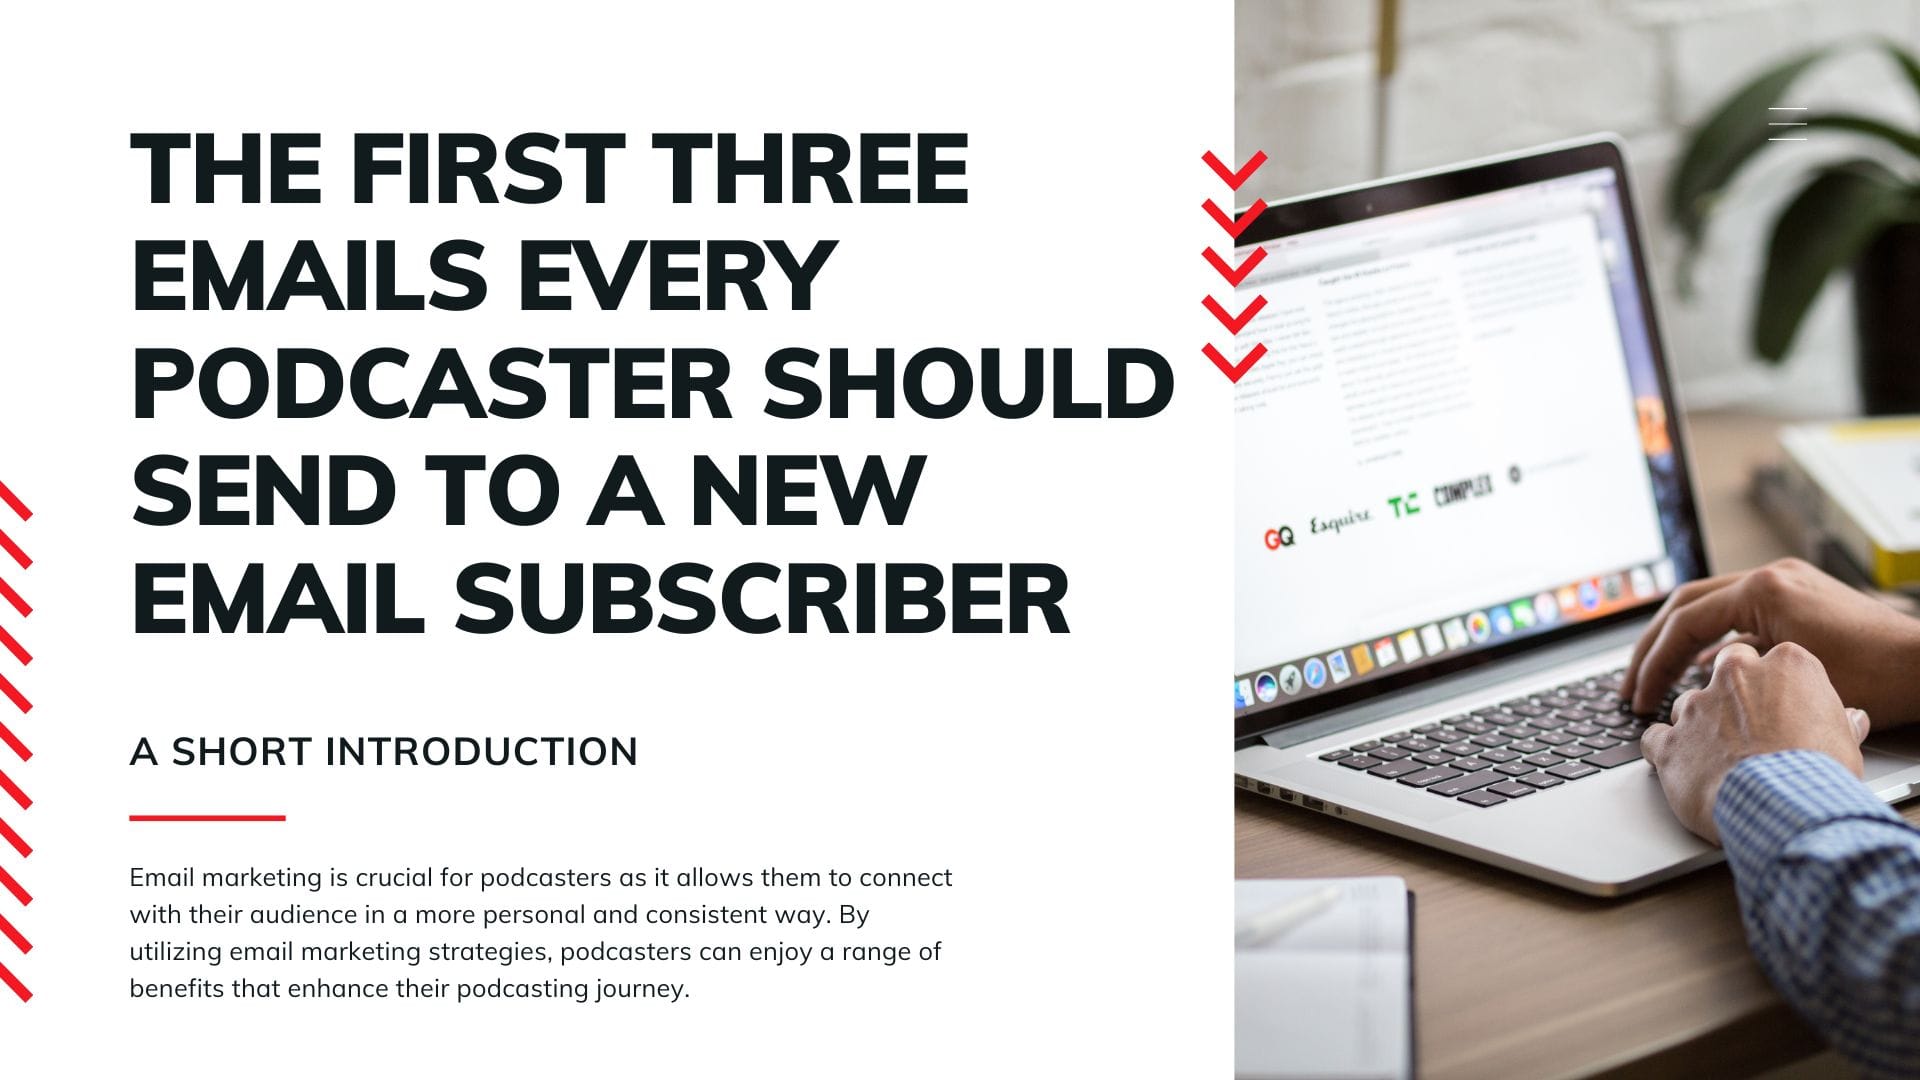 The First Three Emails Every Podcaster Should Send to a New Email Subscriber